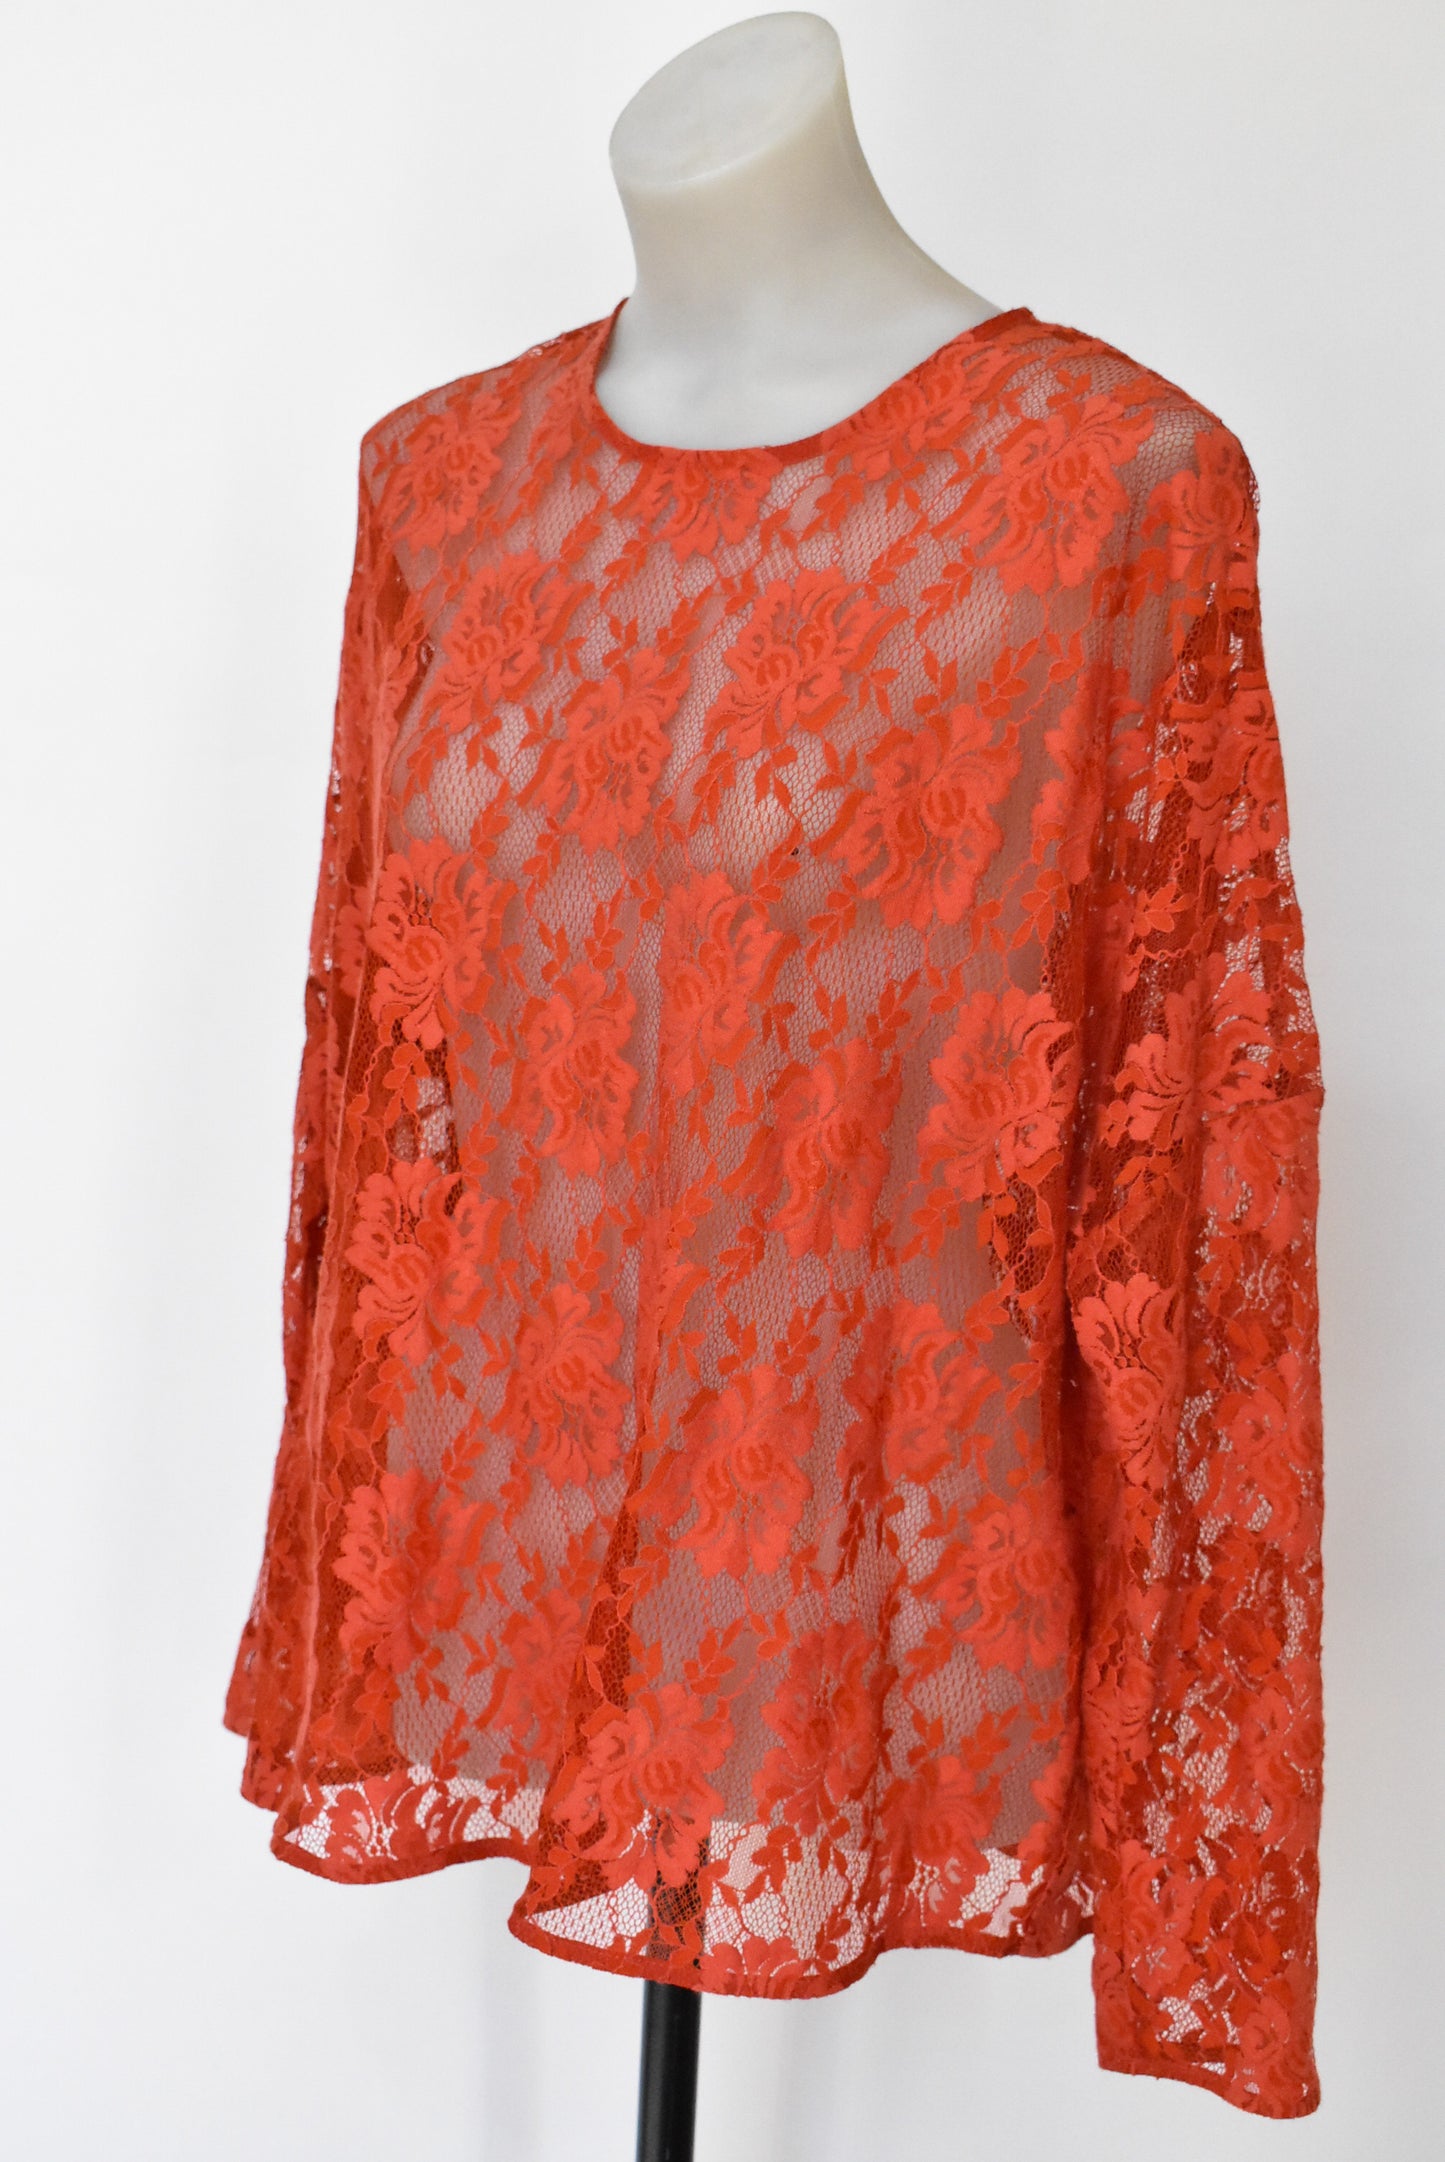 Marilyn Seyb lace style red top, 12